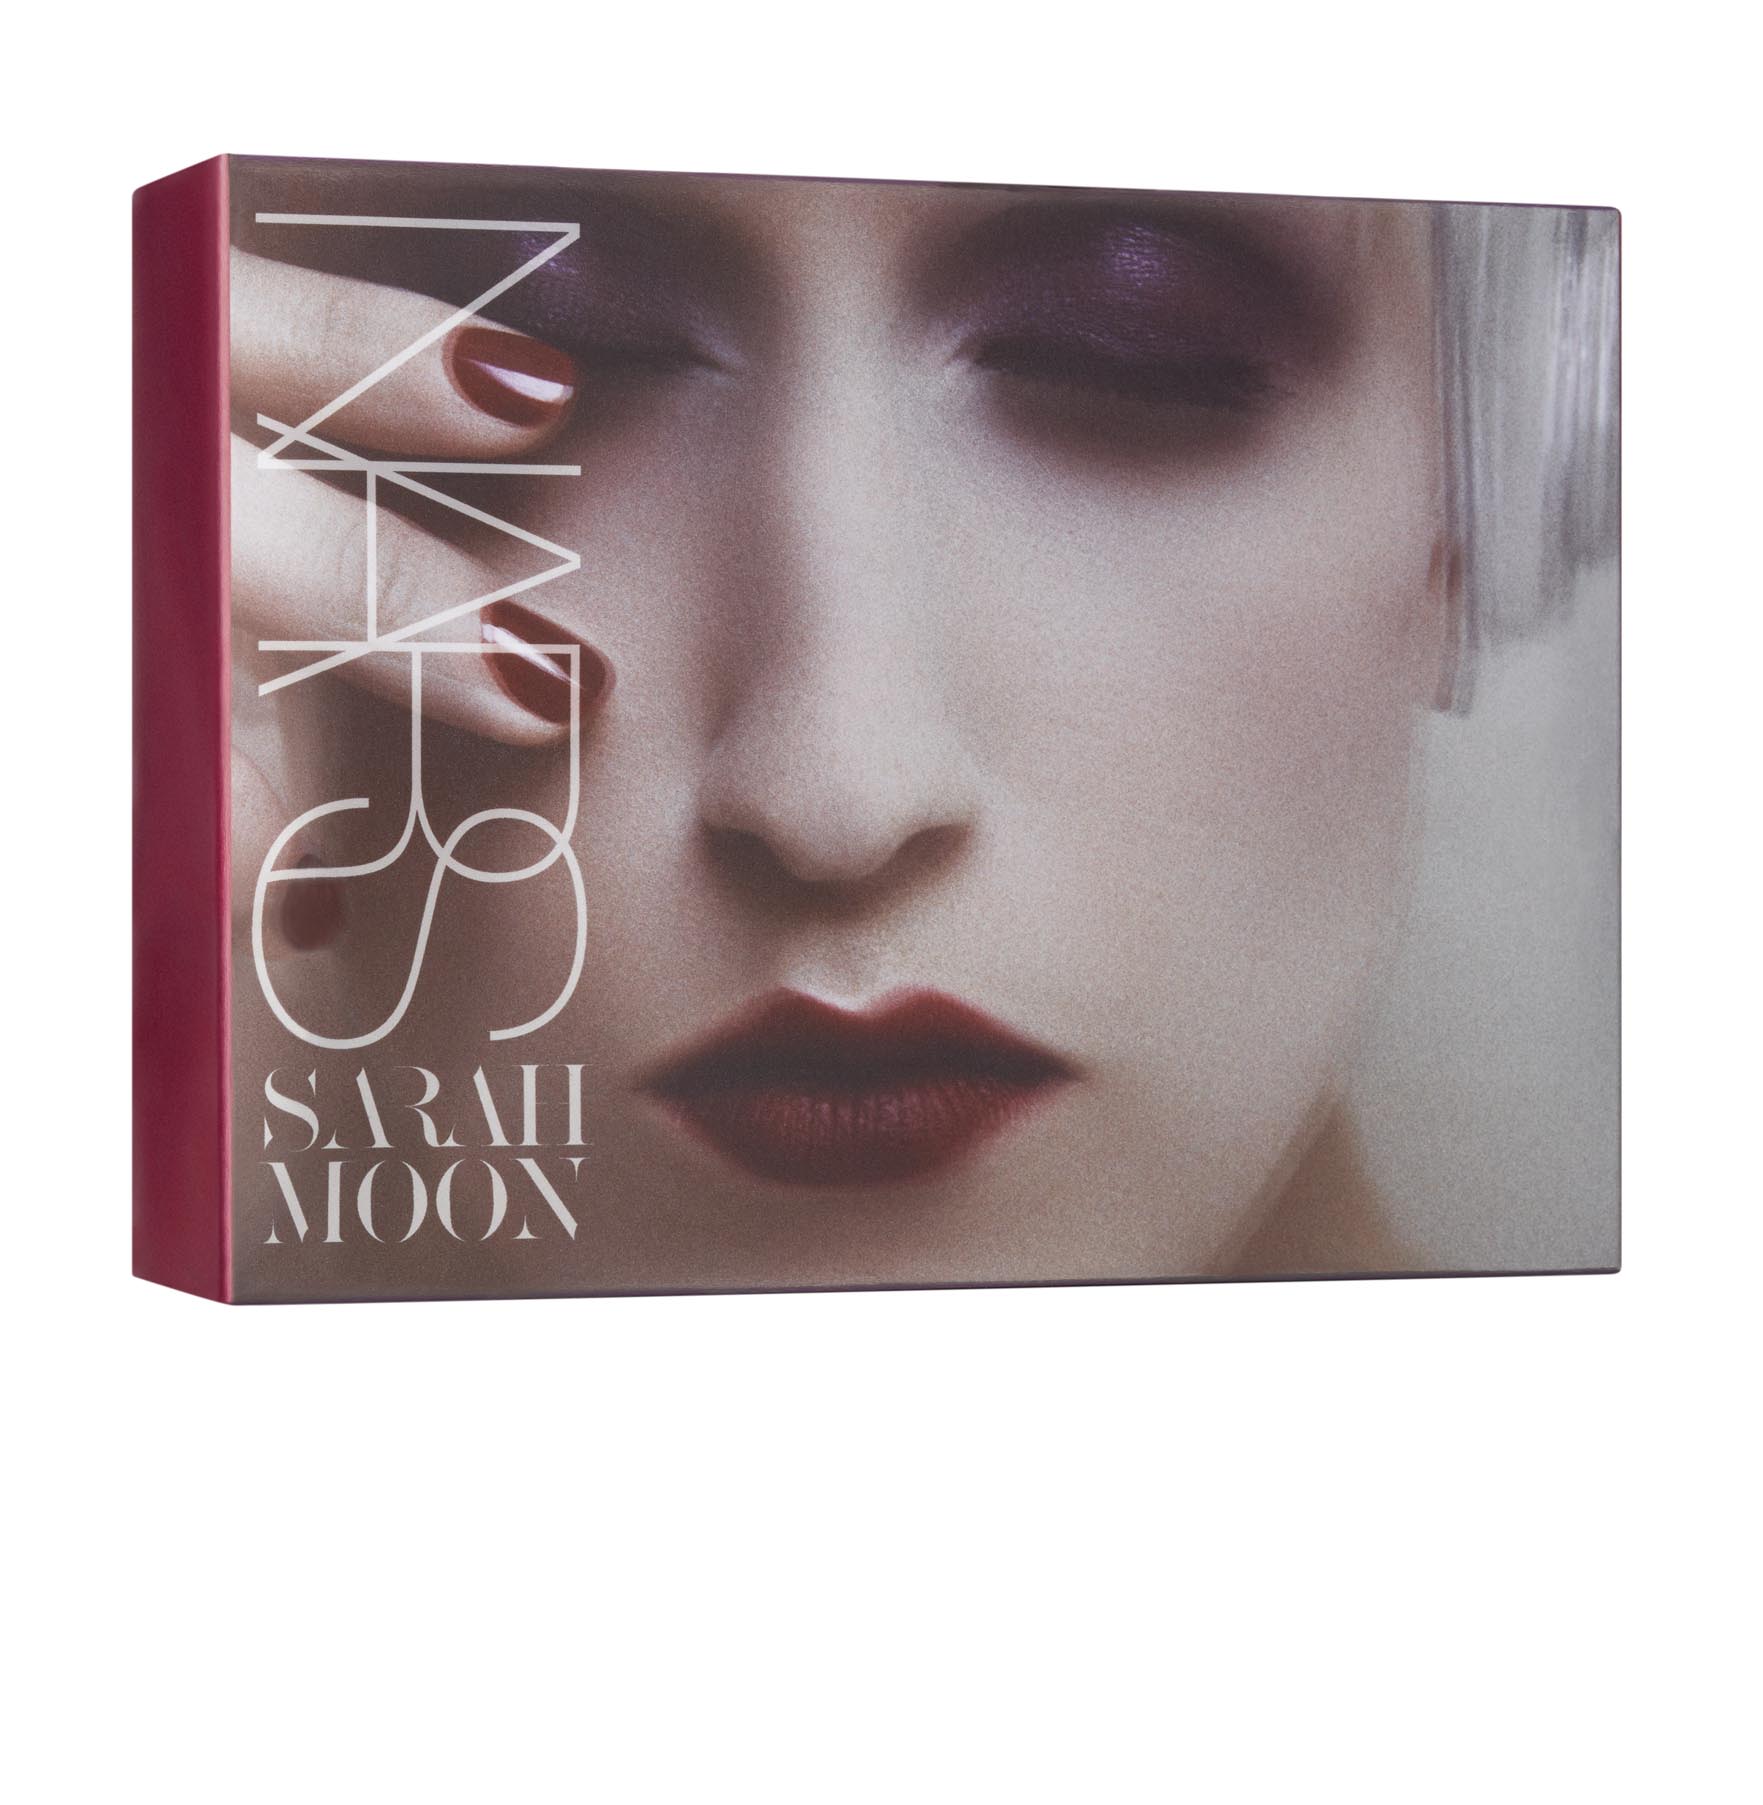 Romantically minded: the limited edition Sarah Moon for NARS Mind Game Mini Velvet Lip Glide Coffret